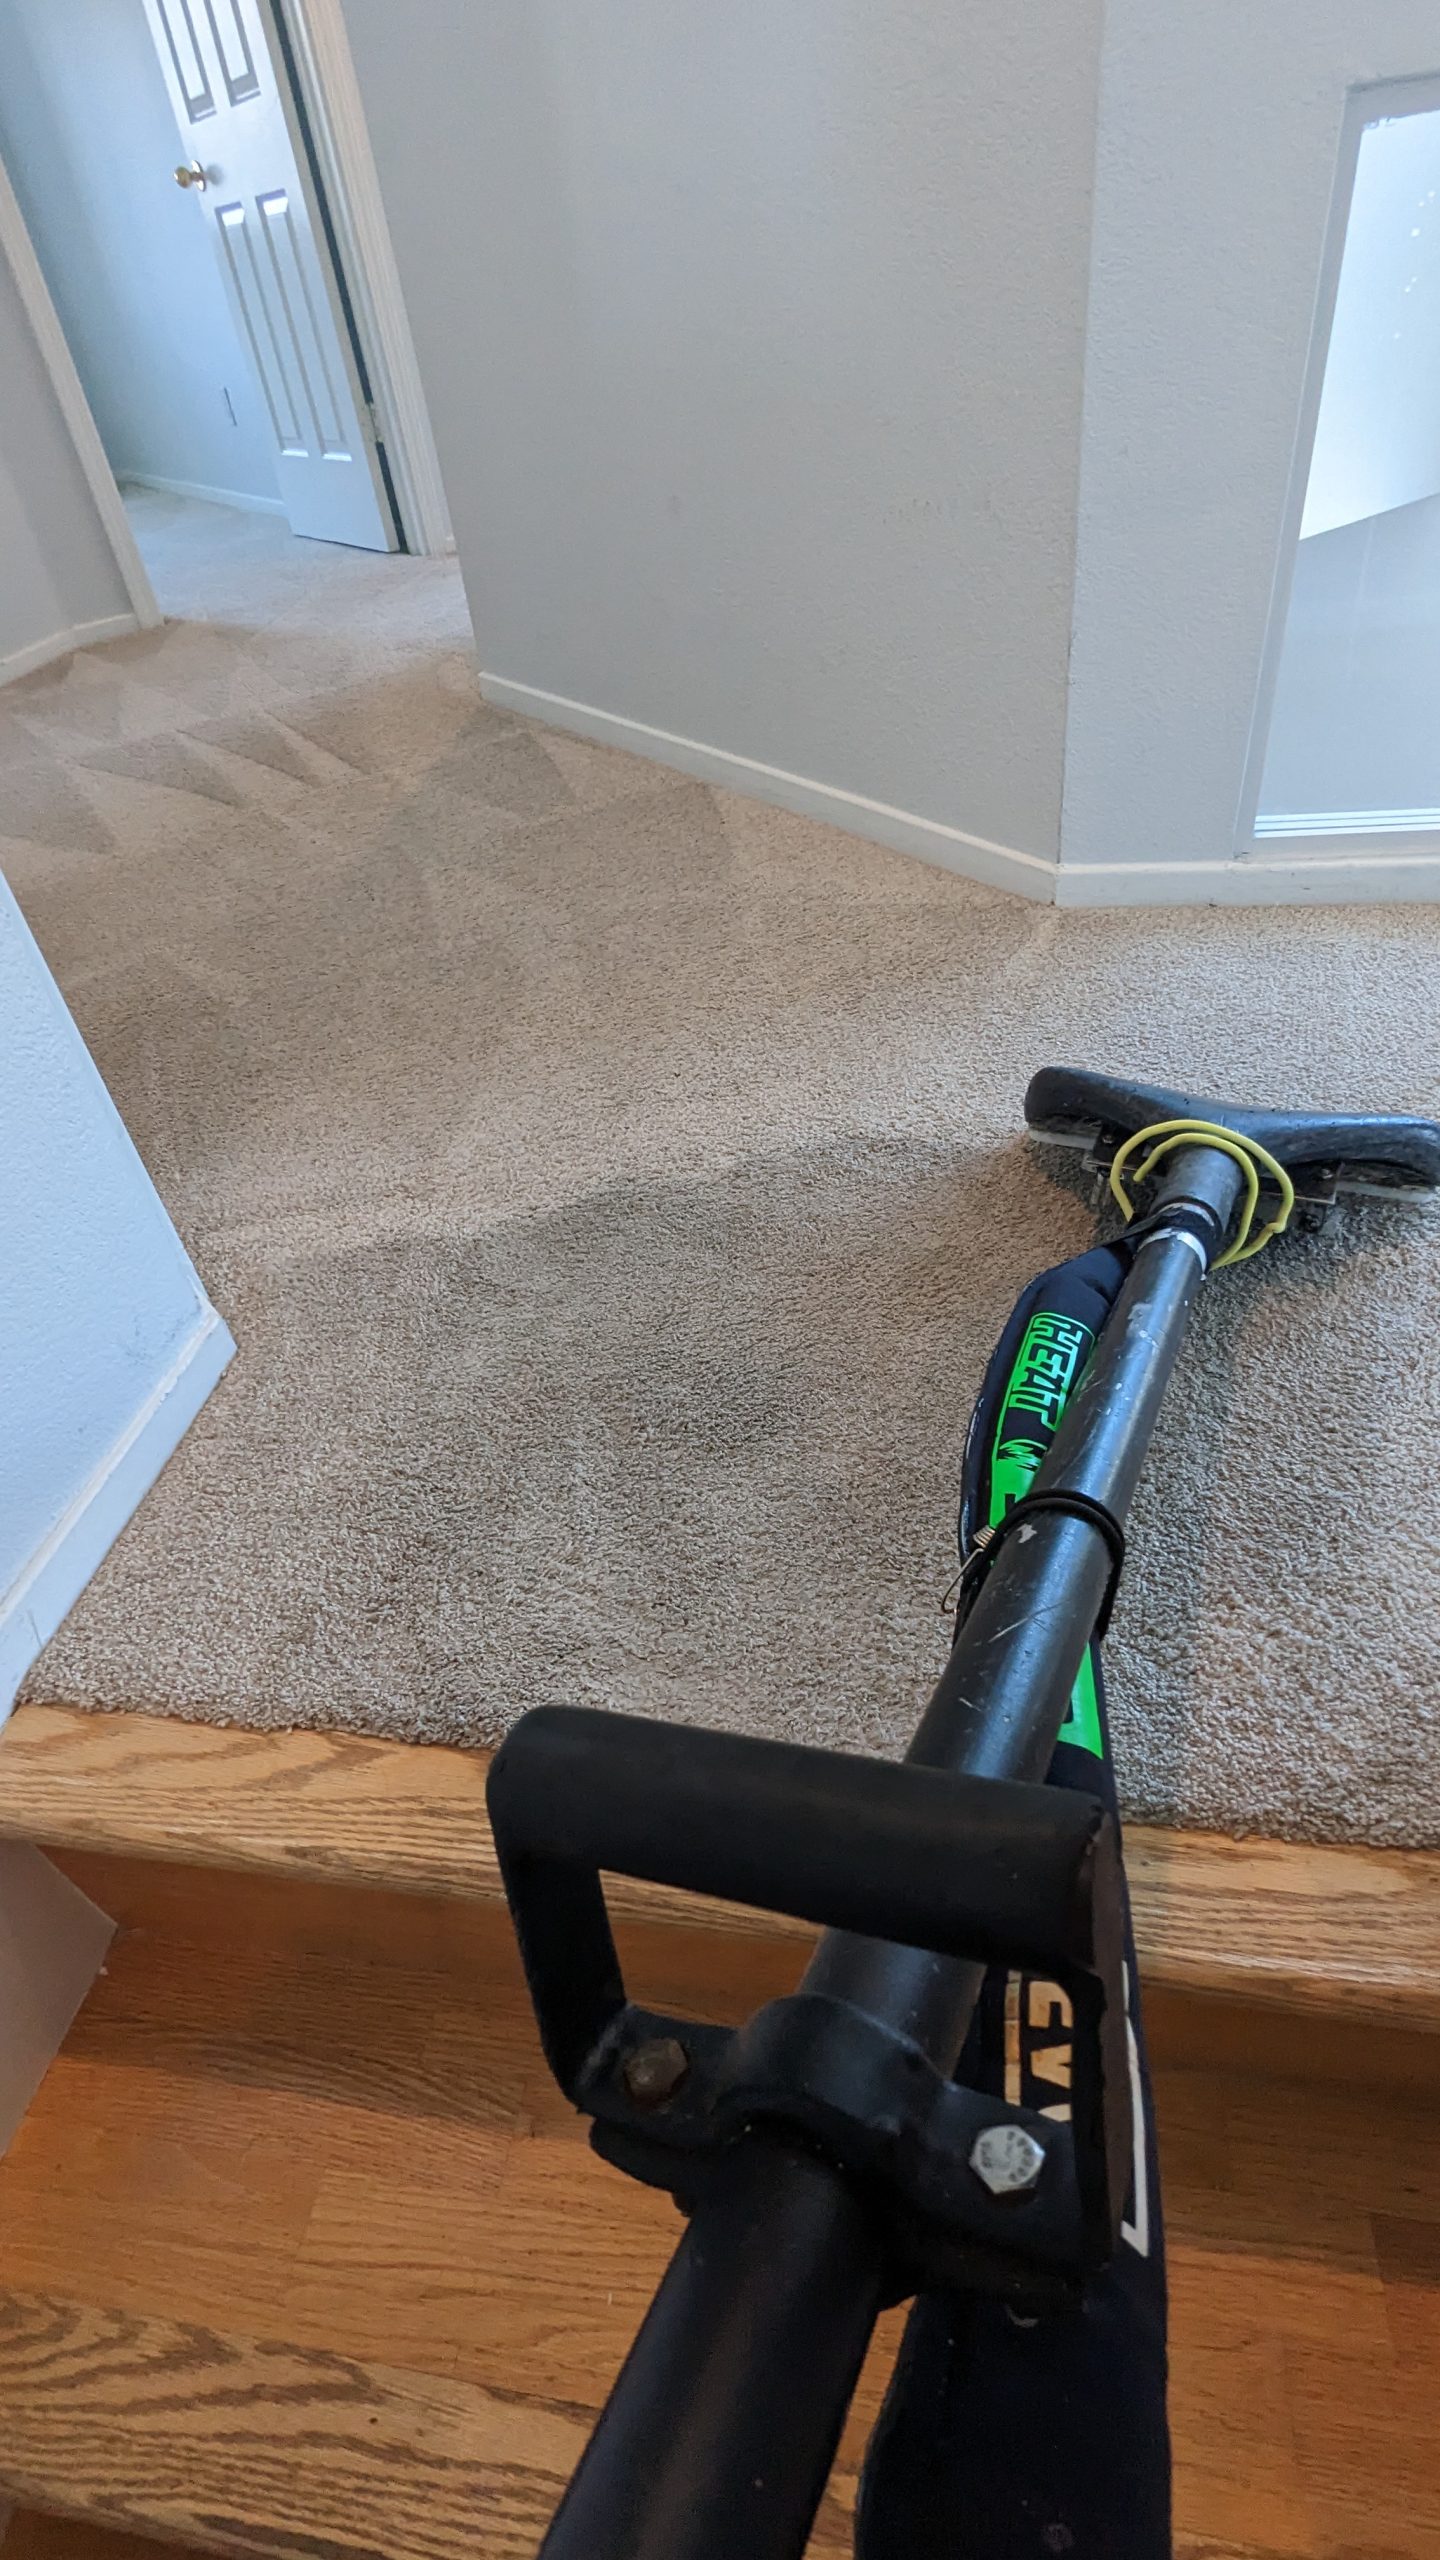 General carpet cleaning services